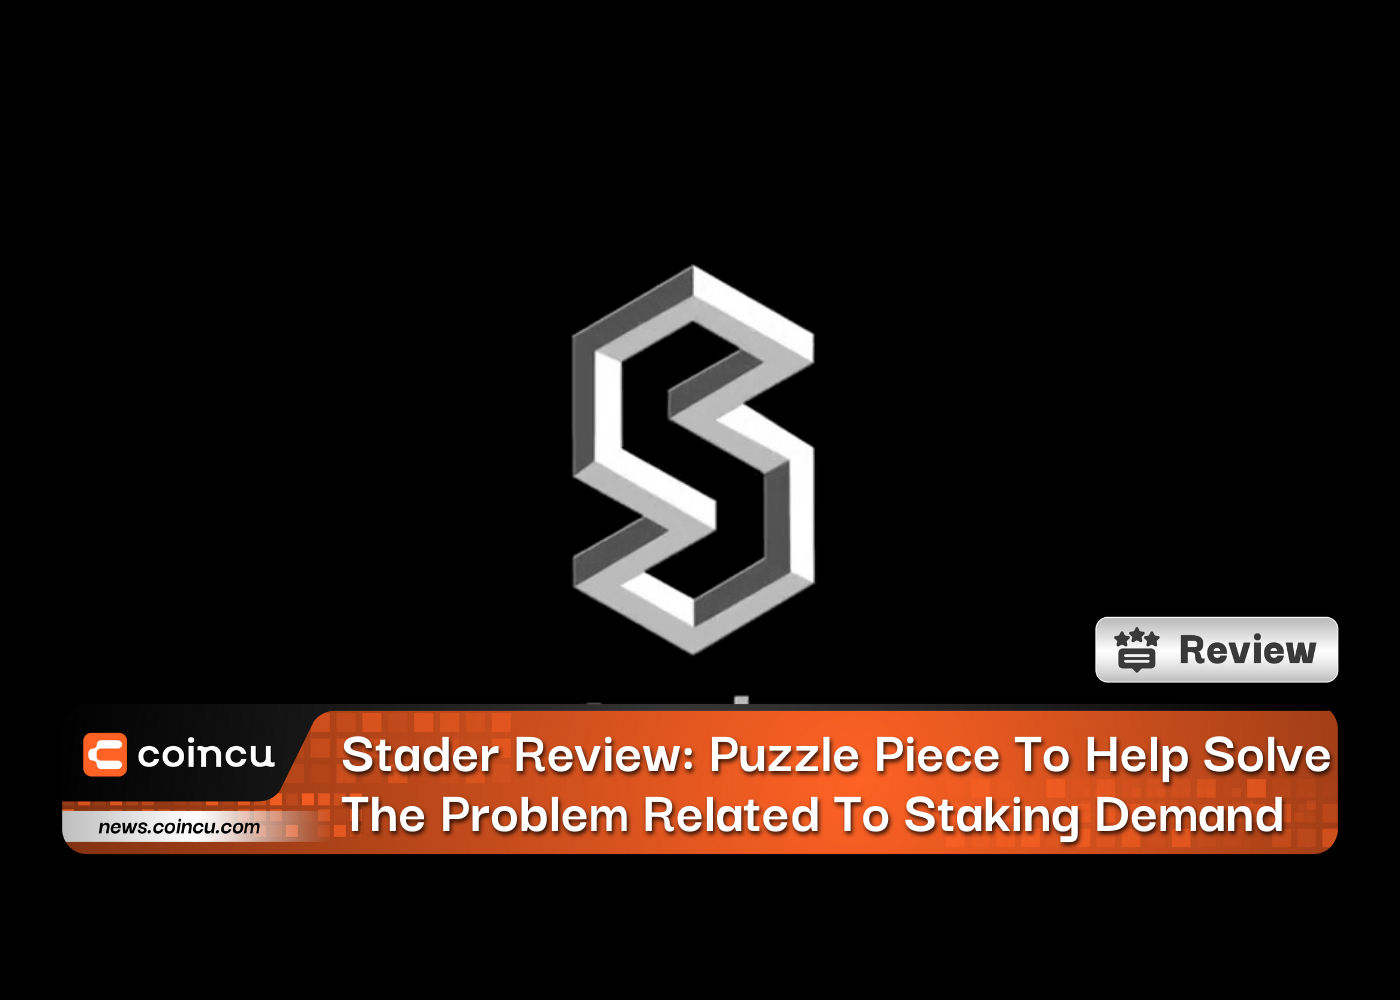 Stader Review: Puzzle Piece To Help Solve The Problem Related To Staking Demand